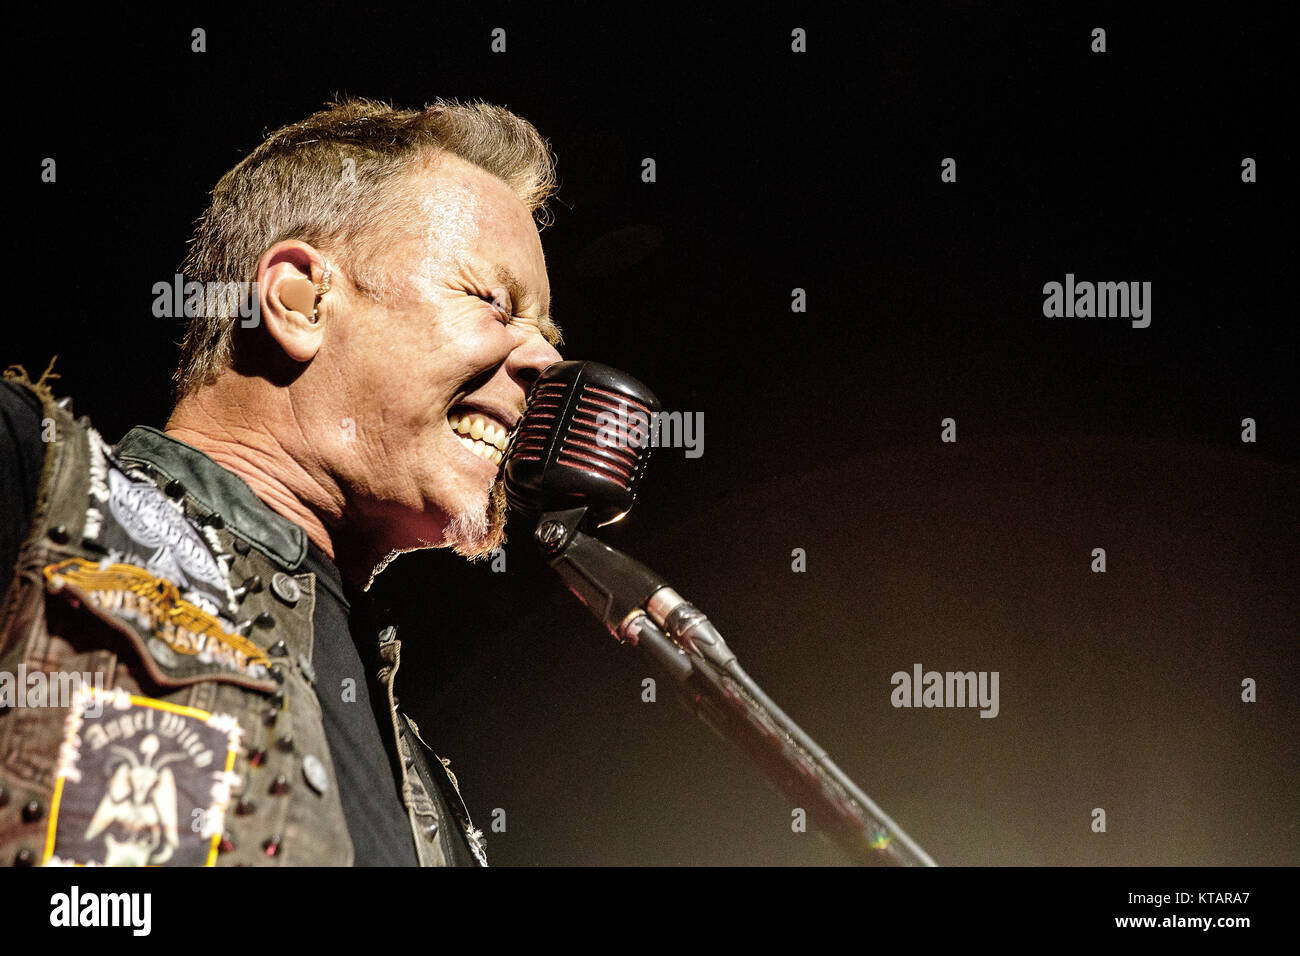 The American heavy metal band Metallica performs live concerts at Royal Arena in Copenhagen as part of the WorldWired Tour 2016-2017. Here vocalist and guitarist James Hetfield is seen live on stage. Denmark 07/02 2017. Stock Photo